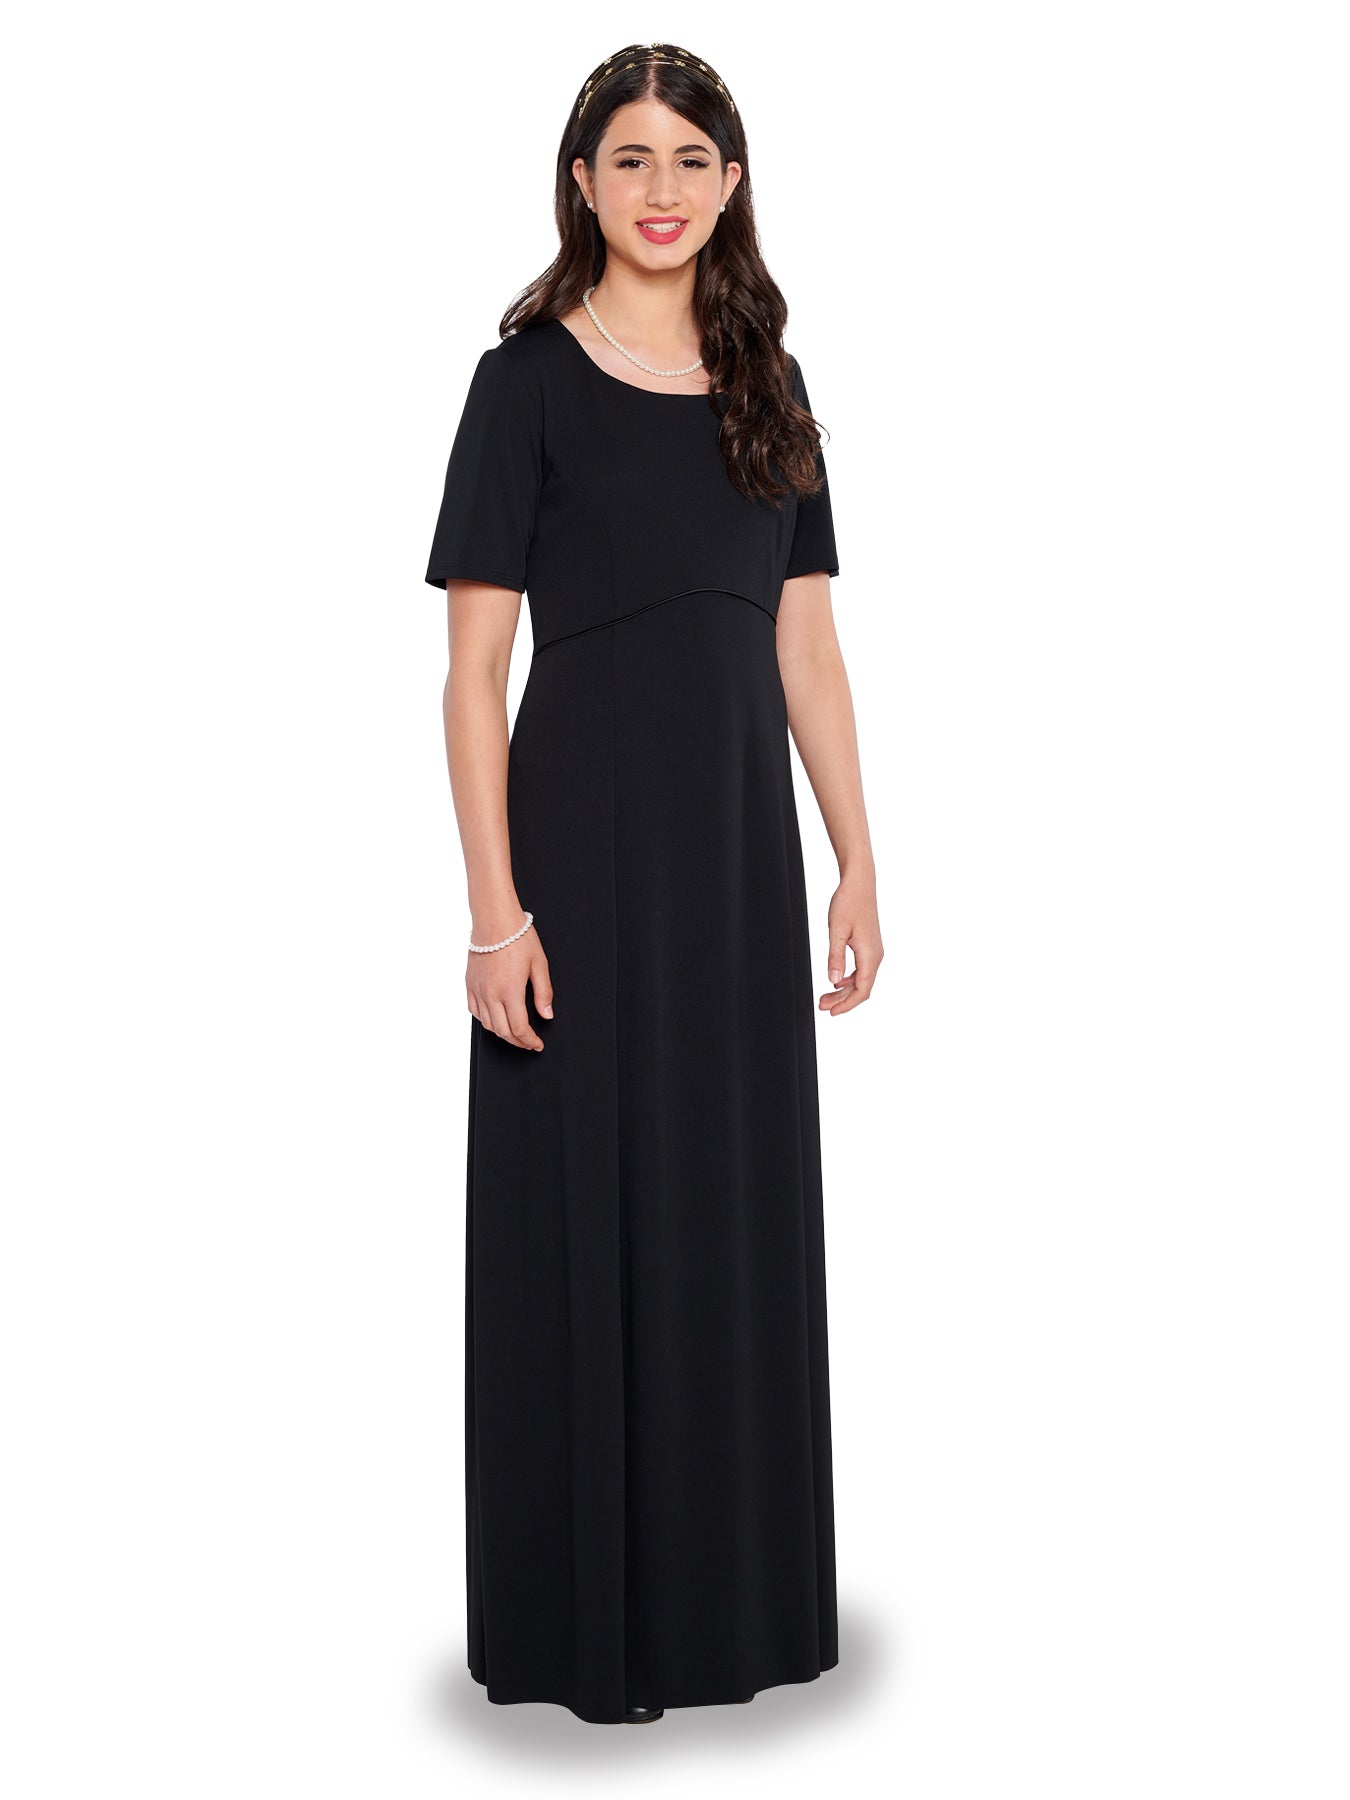 LILY (Style #145) - Scoop Neck, Short Sleeve Gown